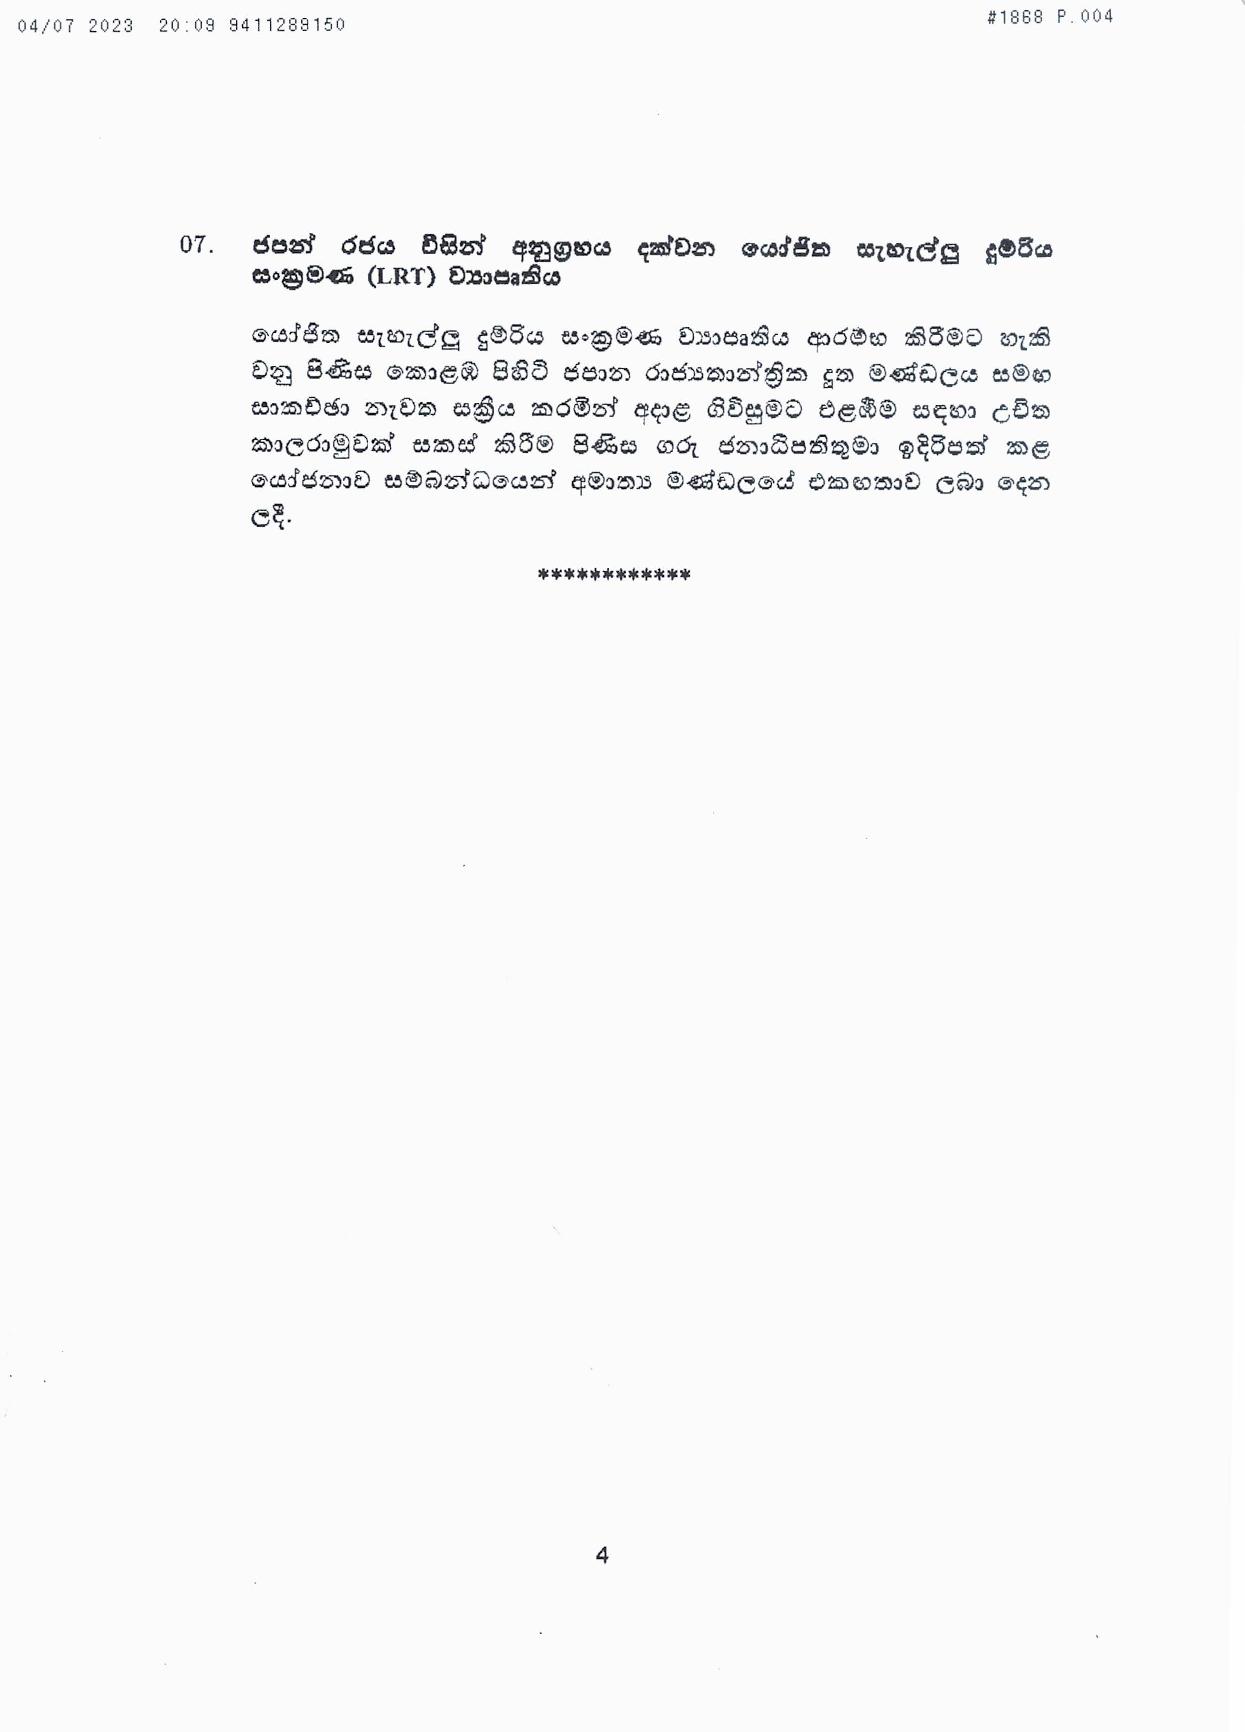 Cabinet Decision on 04.07.2023 page 004